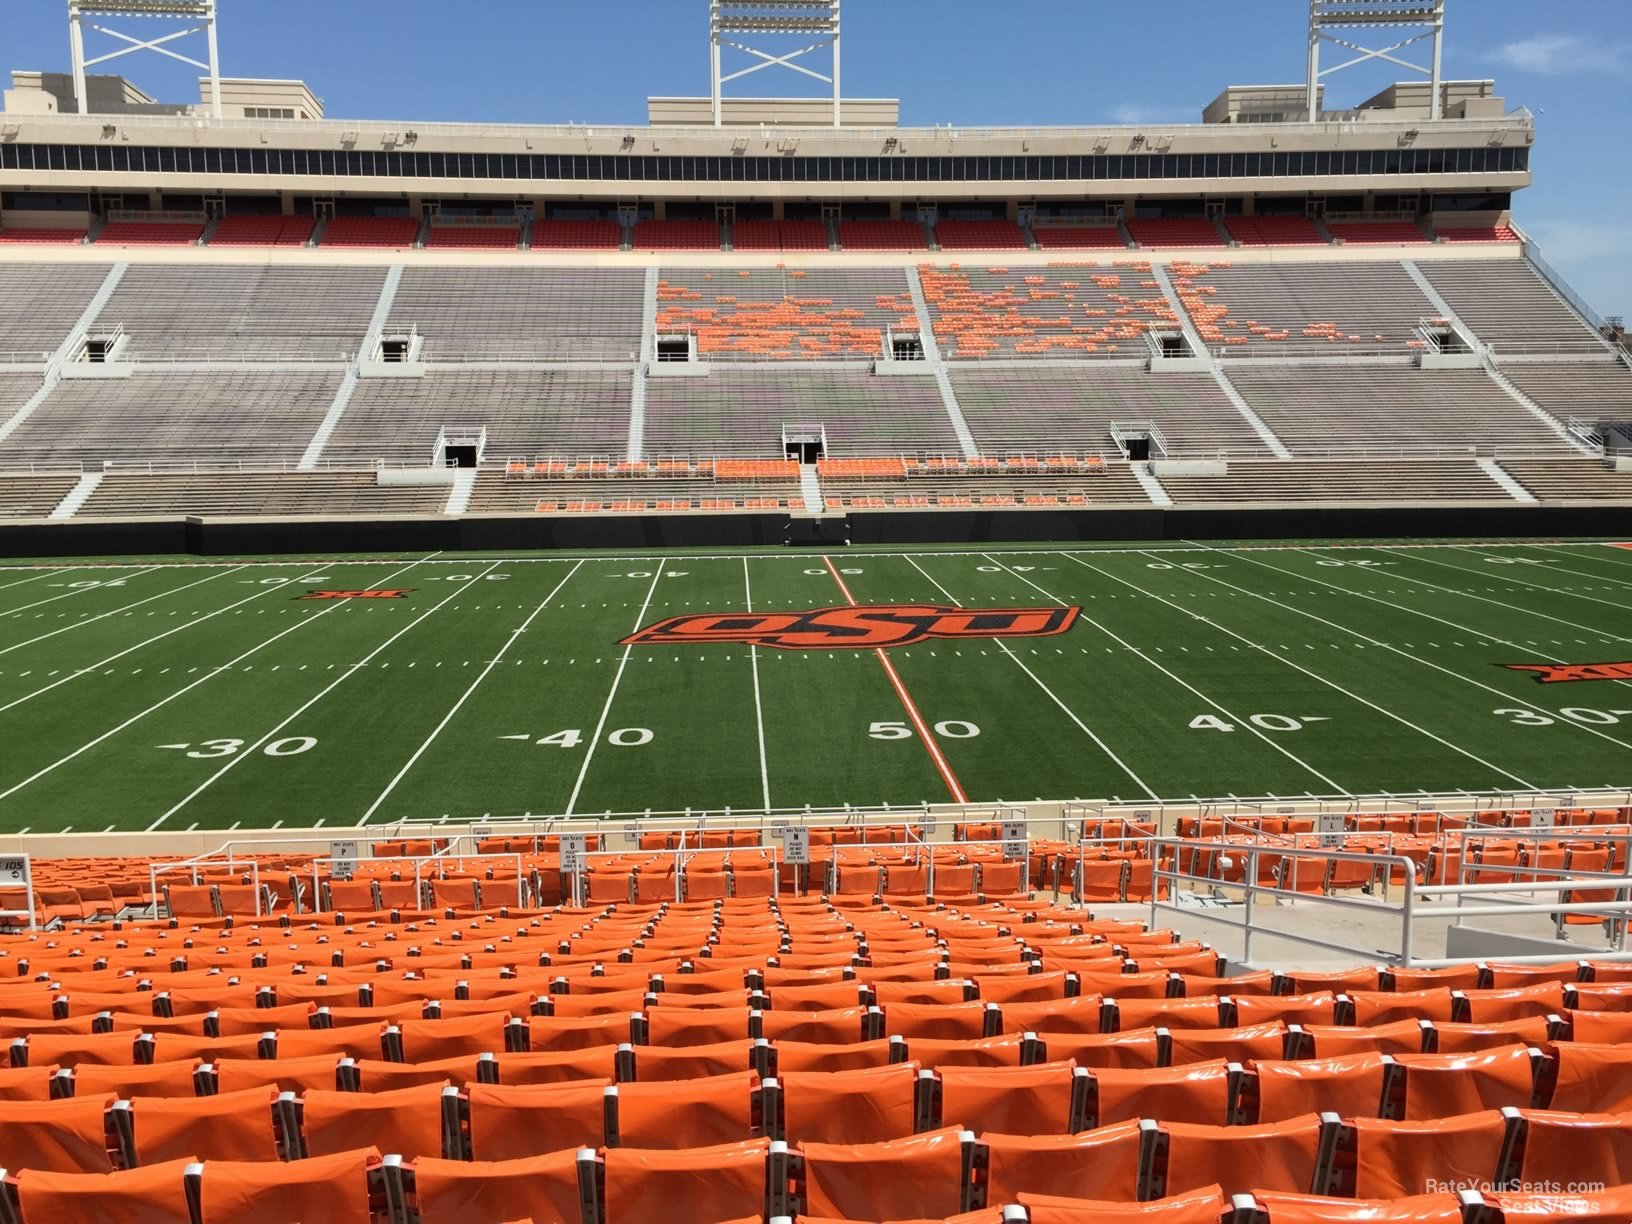 section 206, row 20 seat view  - boone pickens stadium